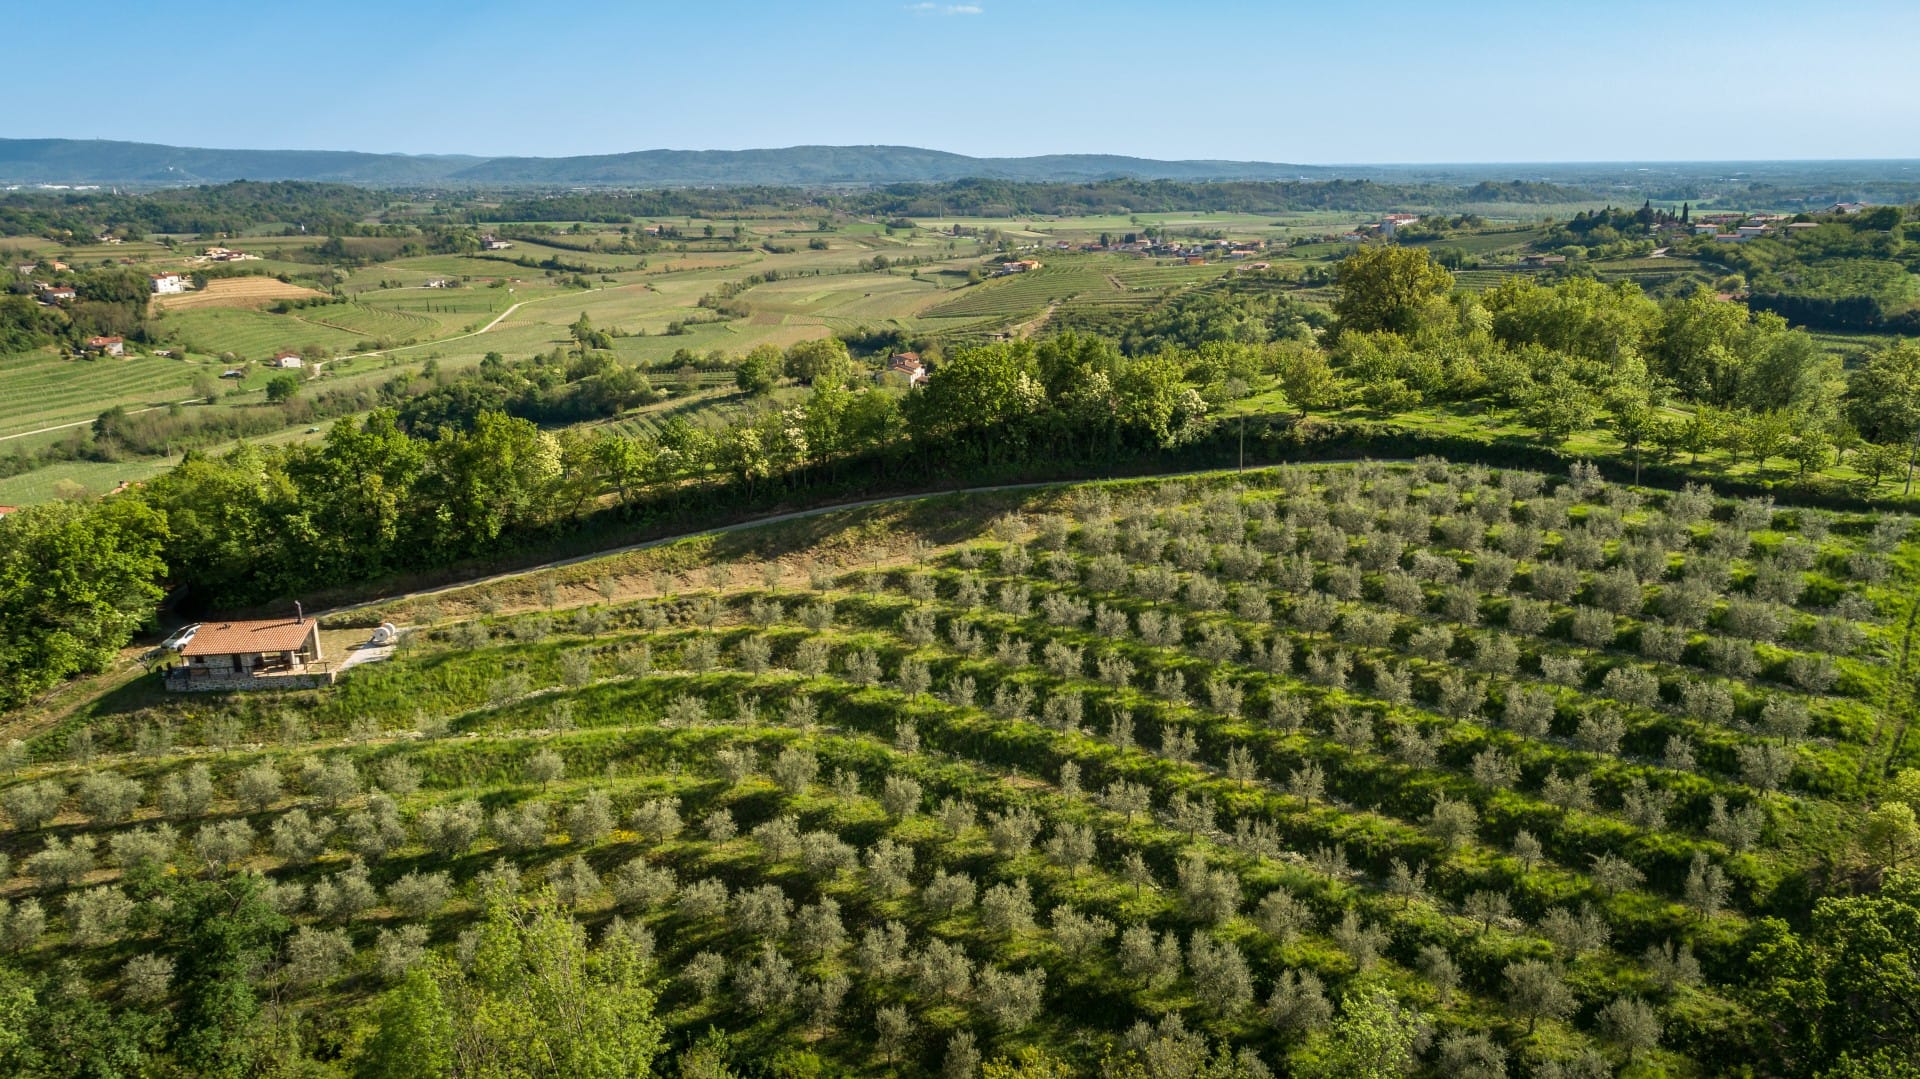 europe-profiles-production-the-best-olive-oils-awardwinning-evoo-the-latest-chapter-in-a-storied-slovenian-family-legacy-olive-oil-times